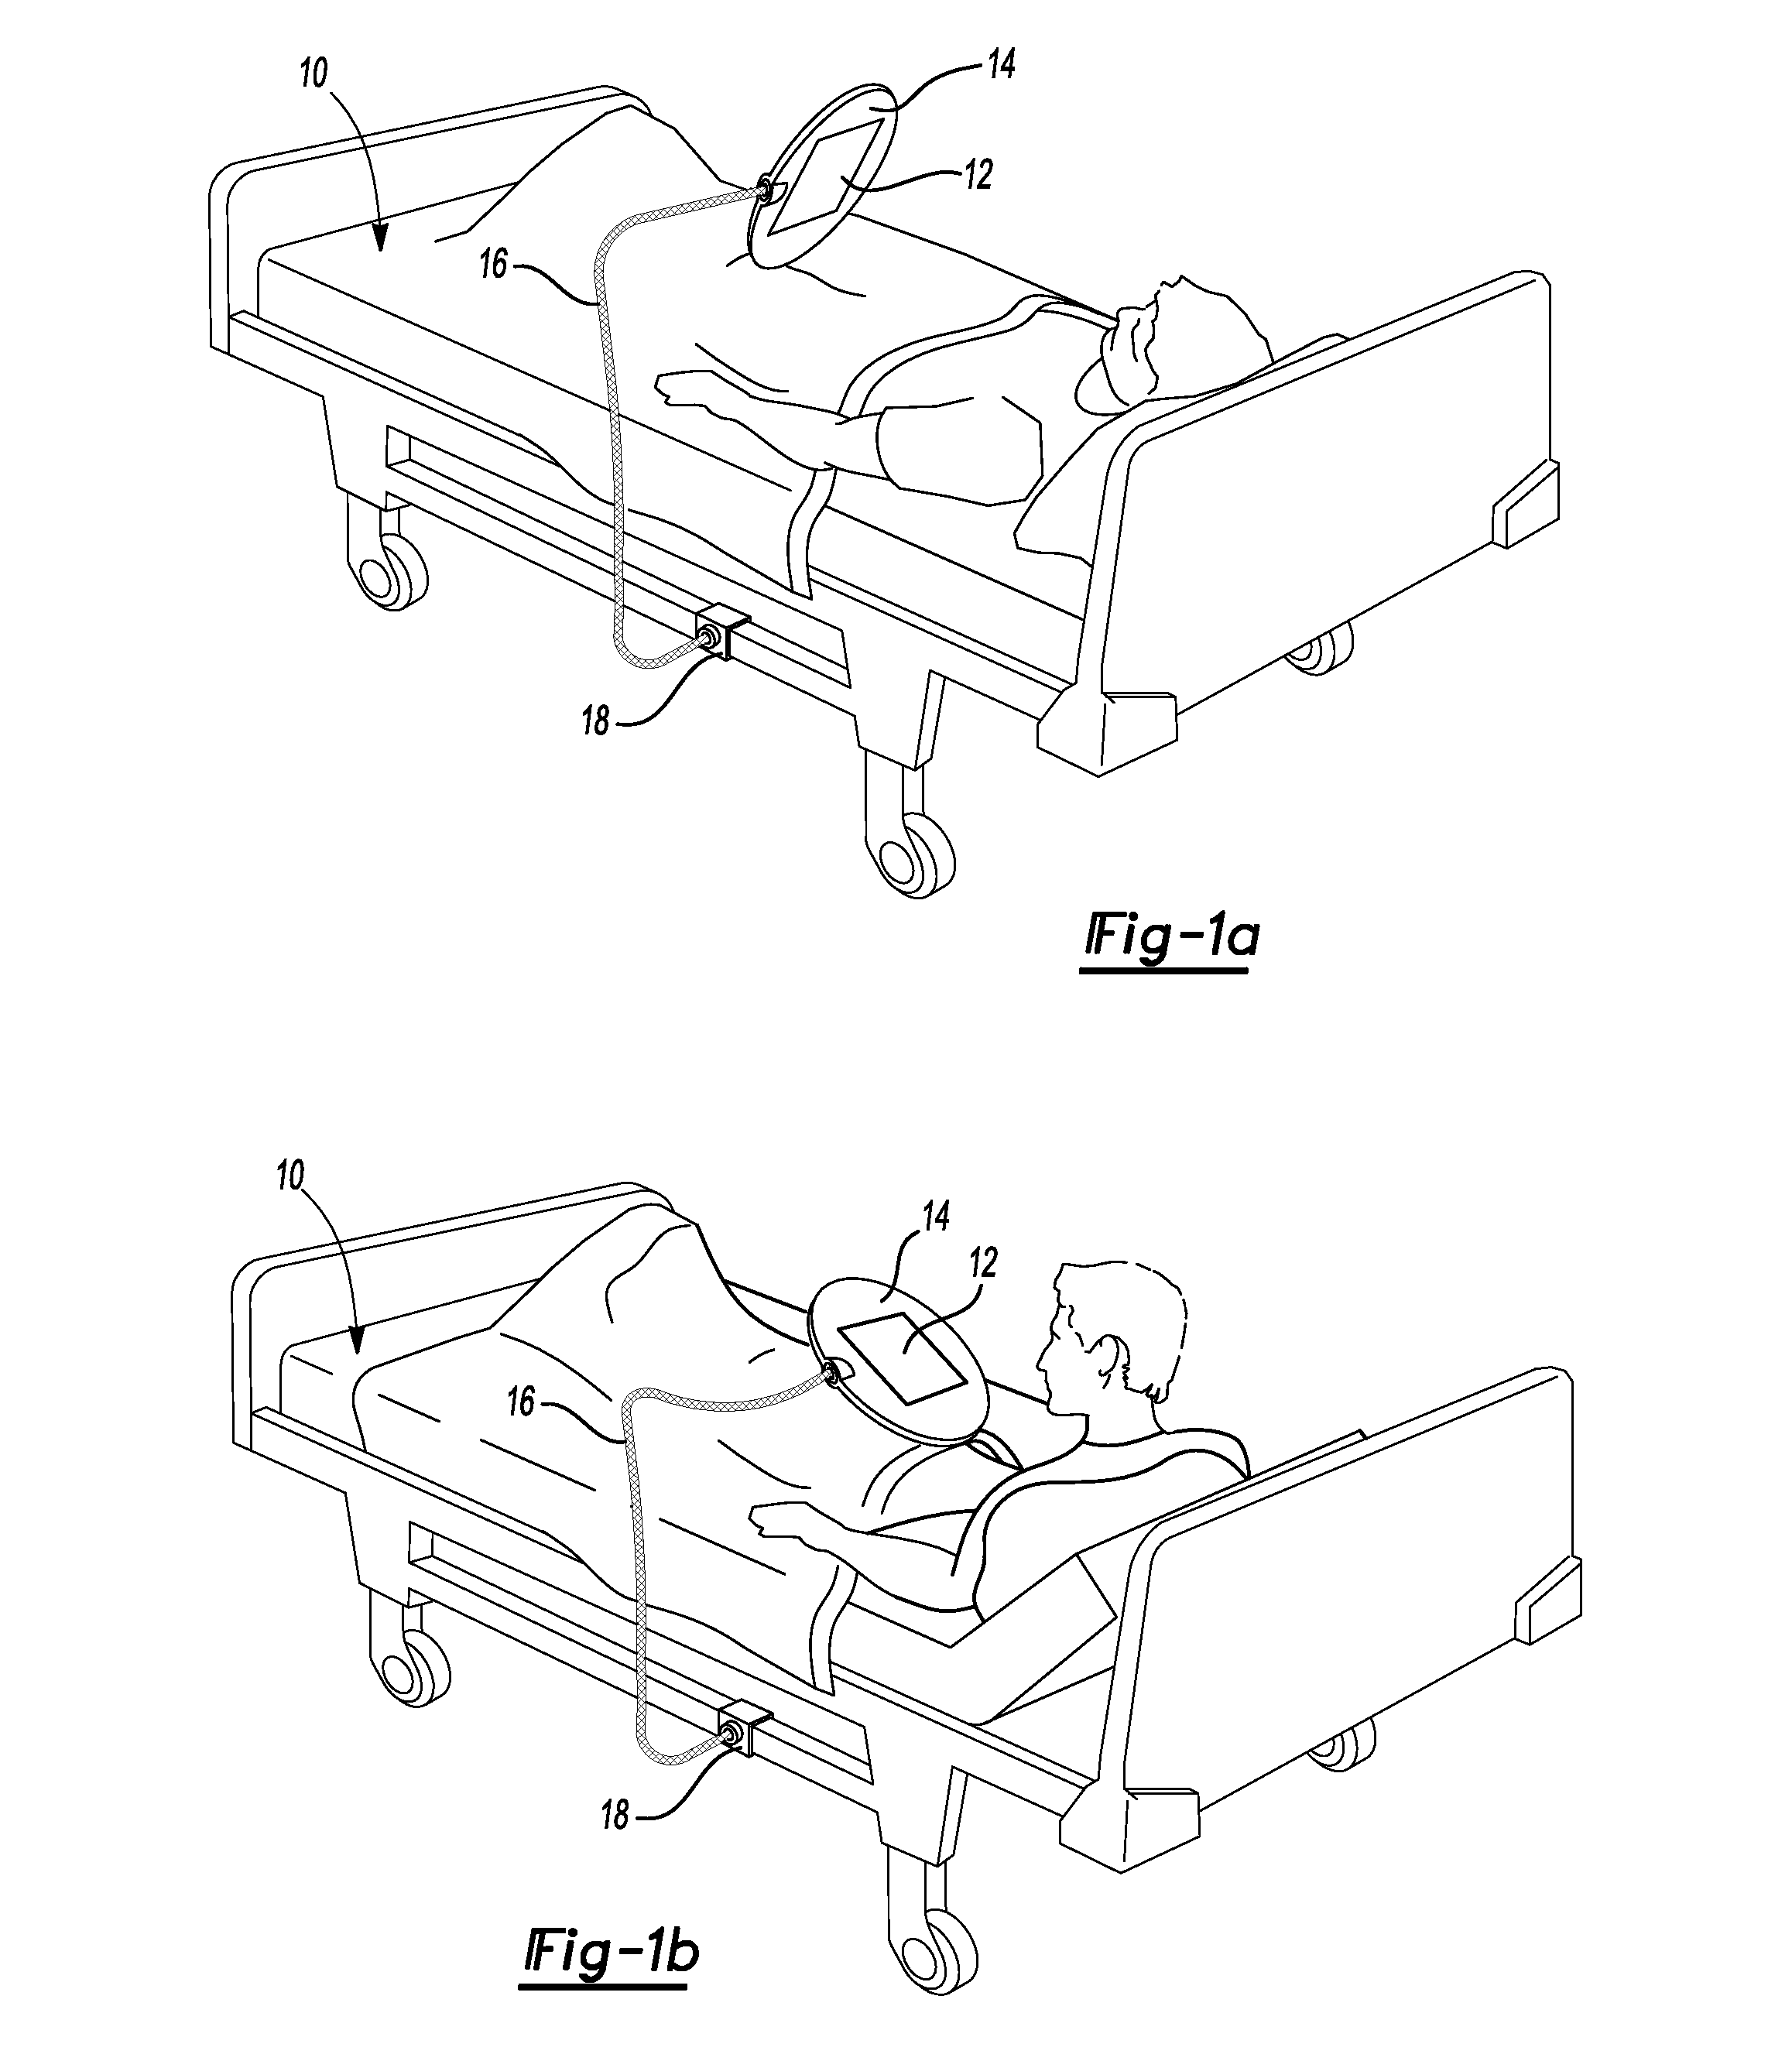 System and method for reorienting and decreasing patient anxiety in a medical facility